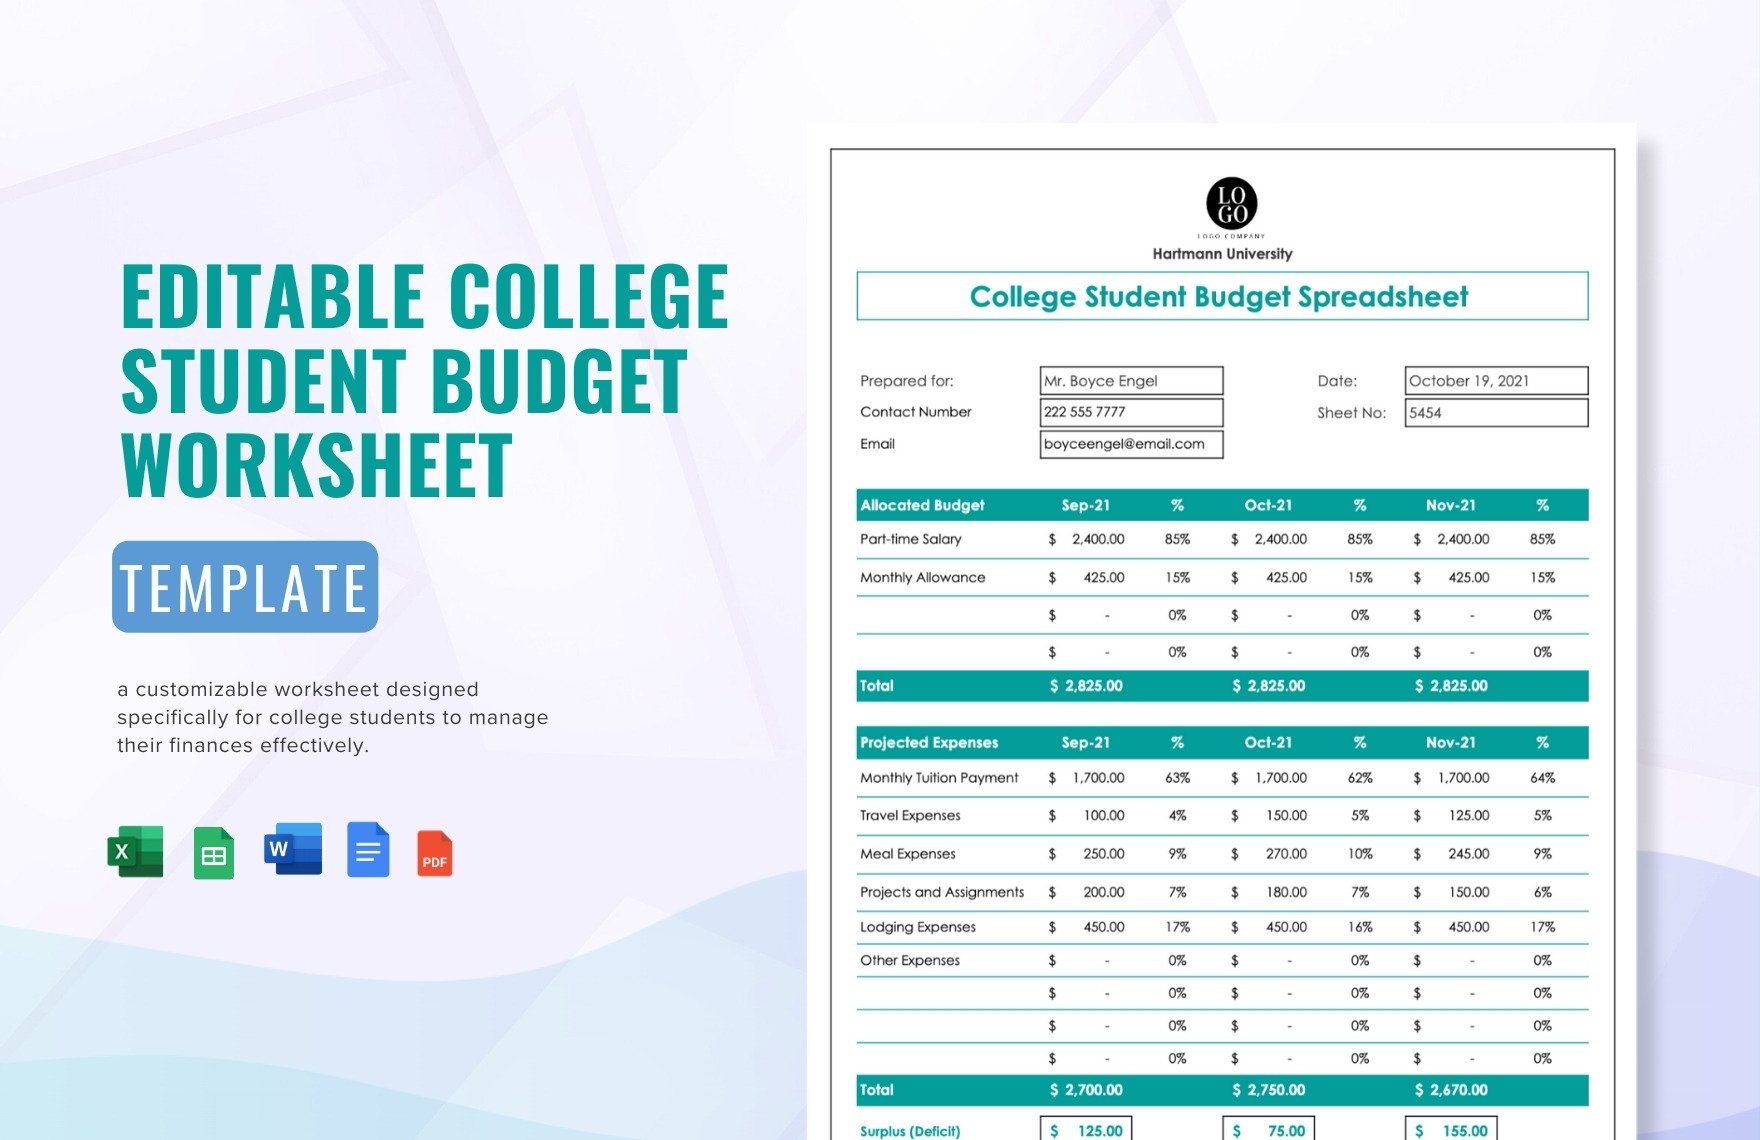 Editable College Student Budget Worksheet Template in Word, Google Docs, Excel, PDF, Google Sheets